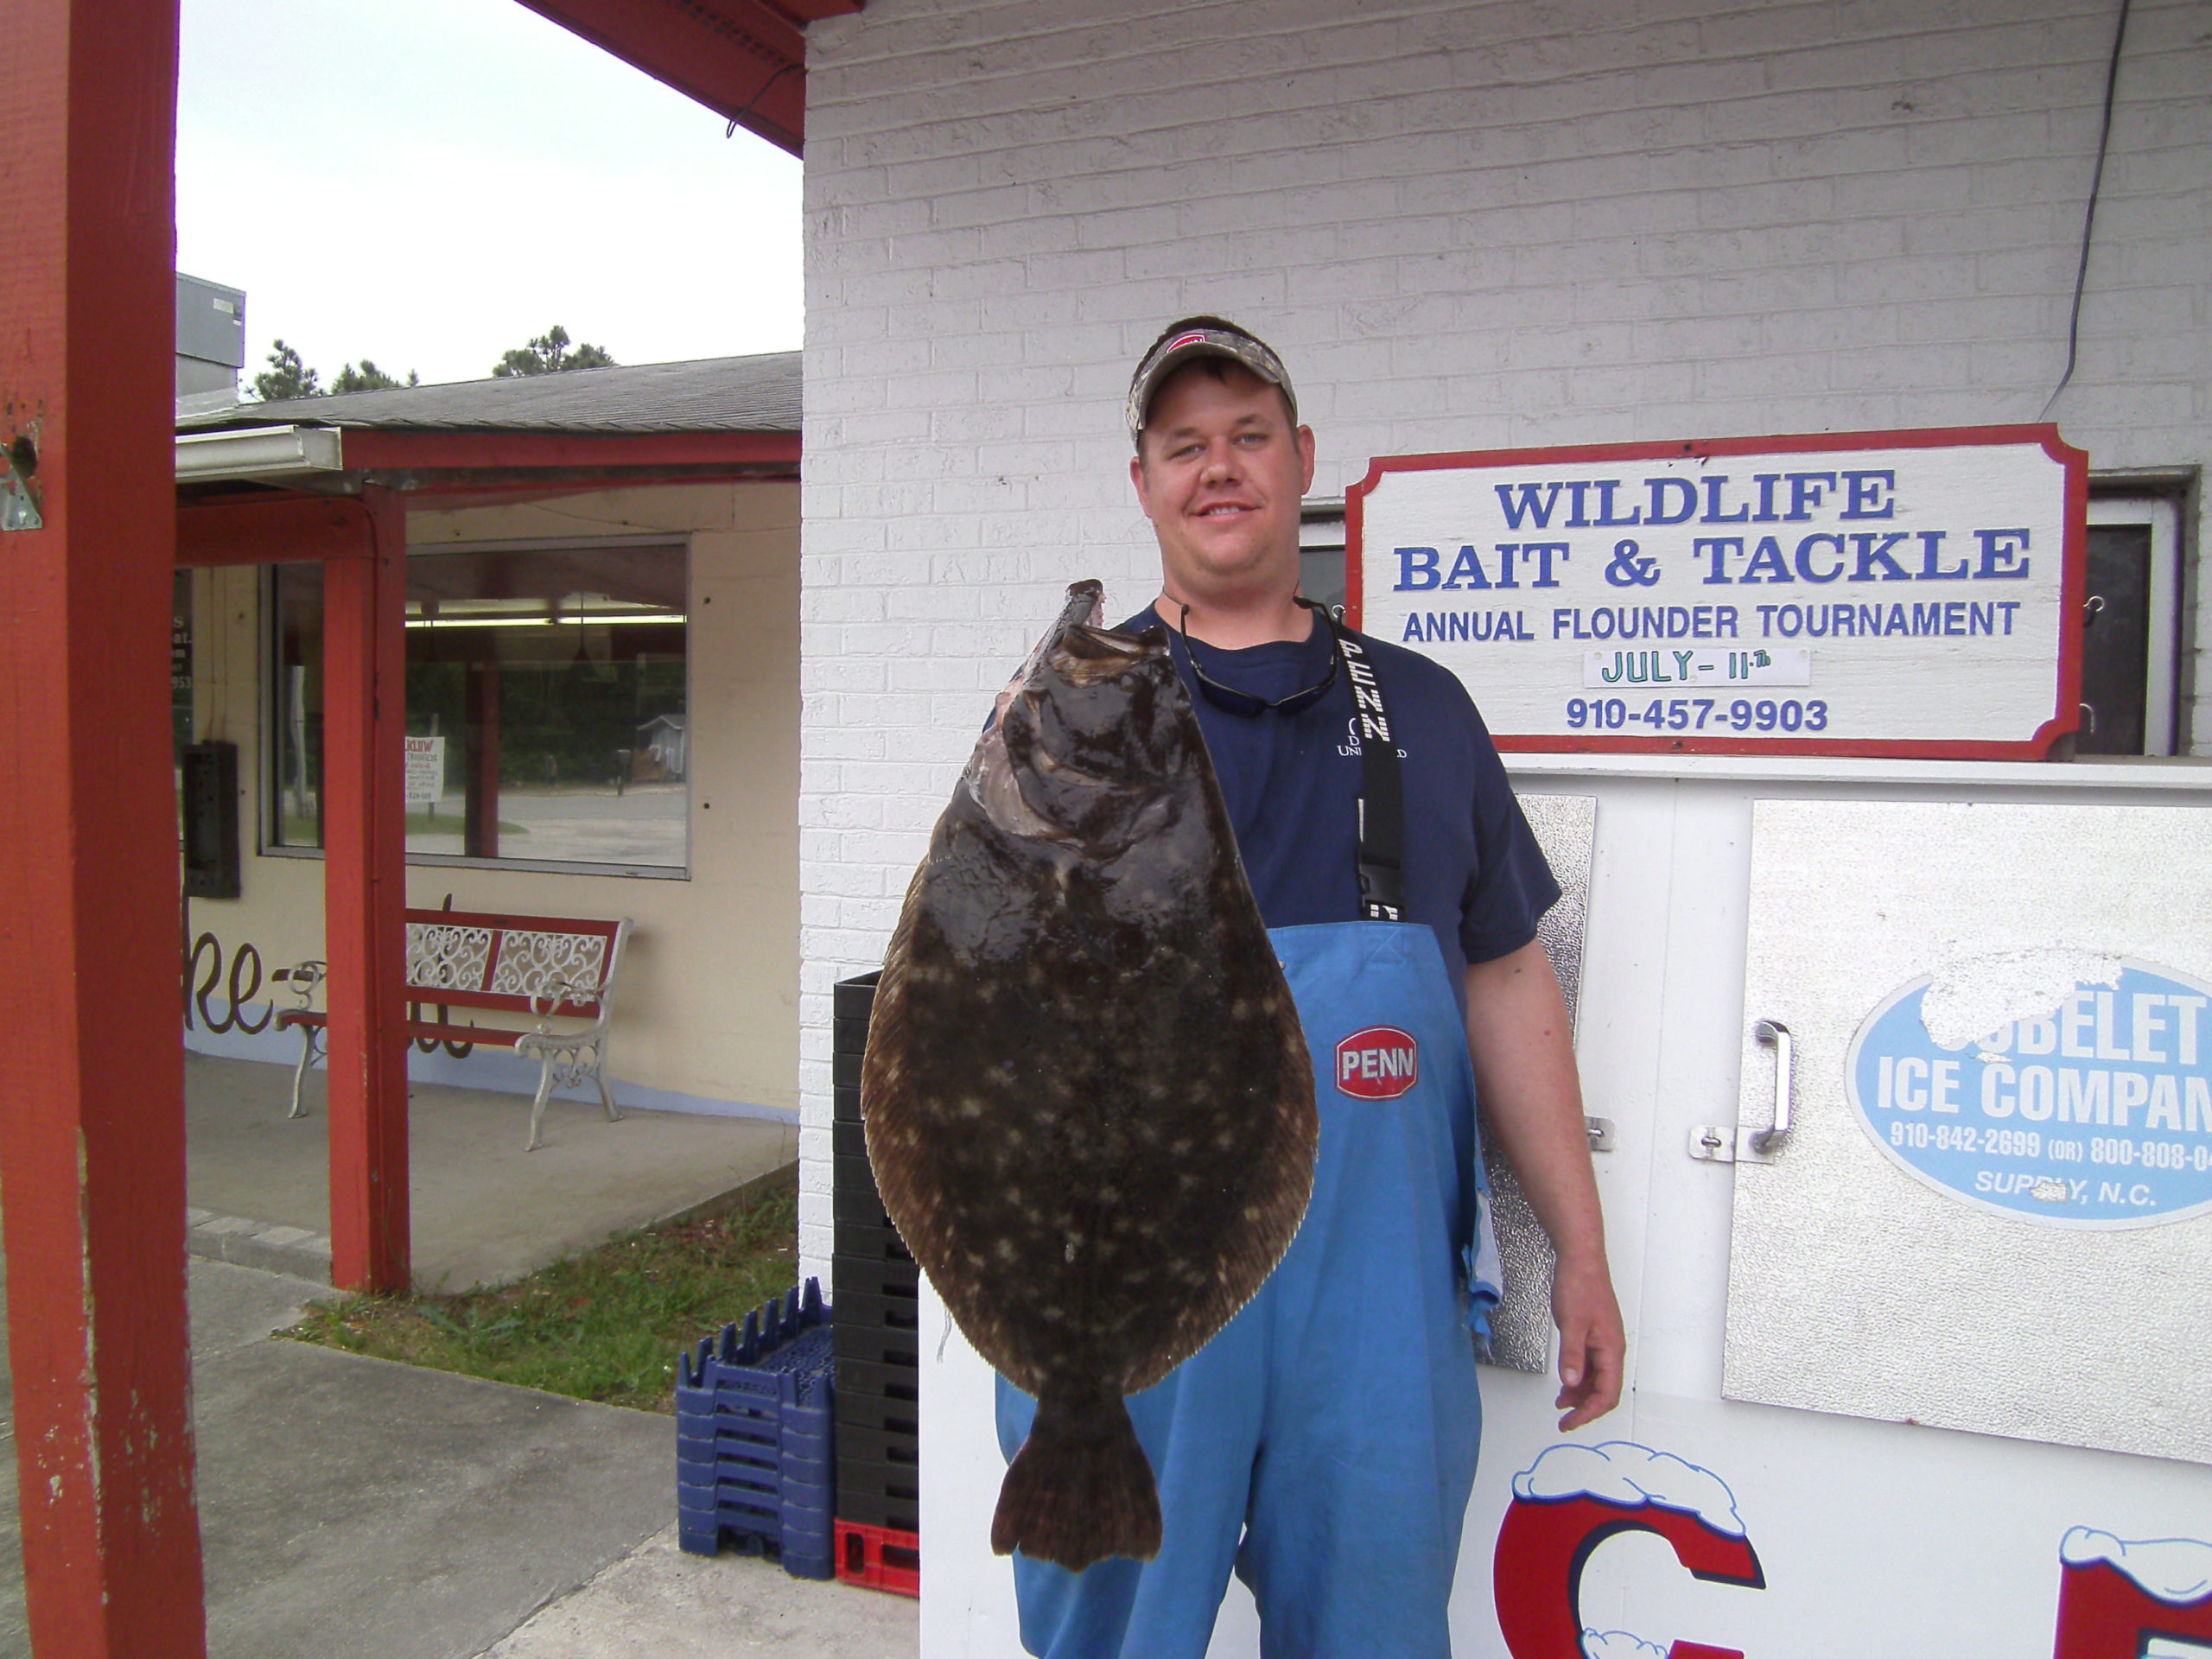 Capt. Jimmy Price shares his priceless flounder-fishing expertise